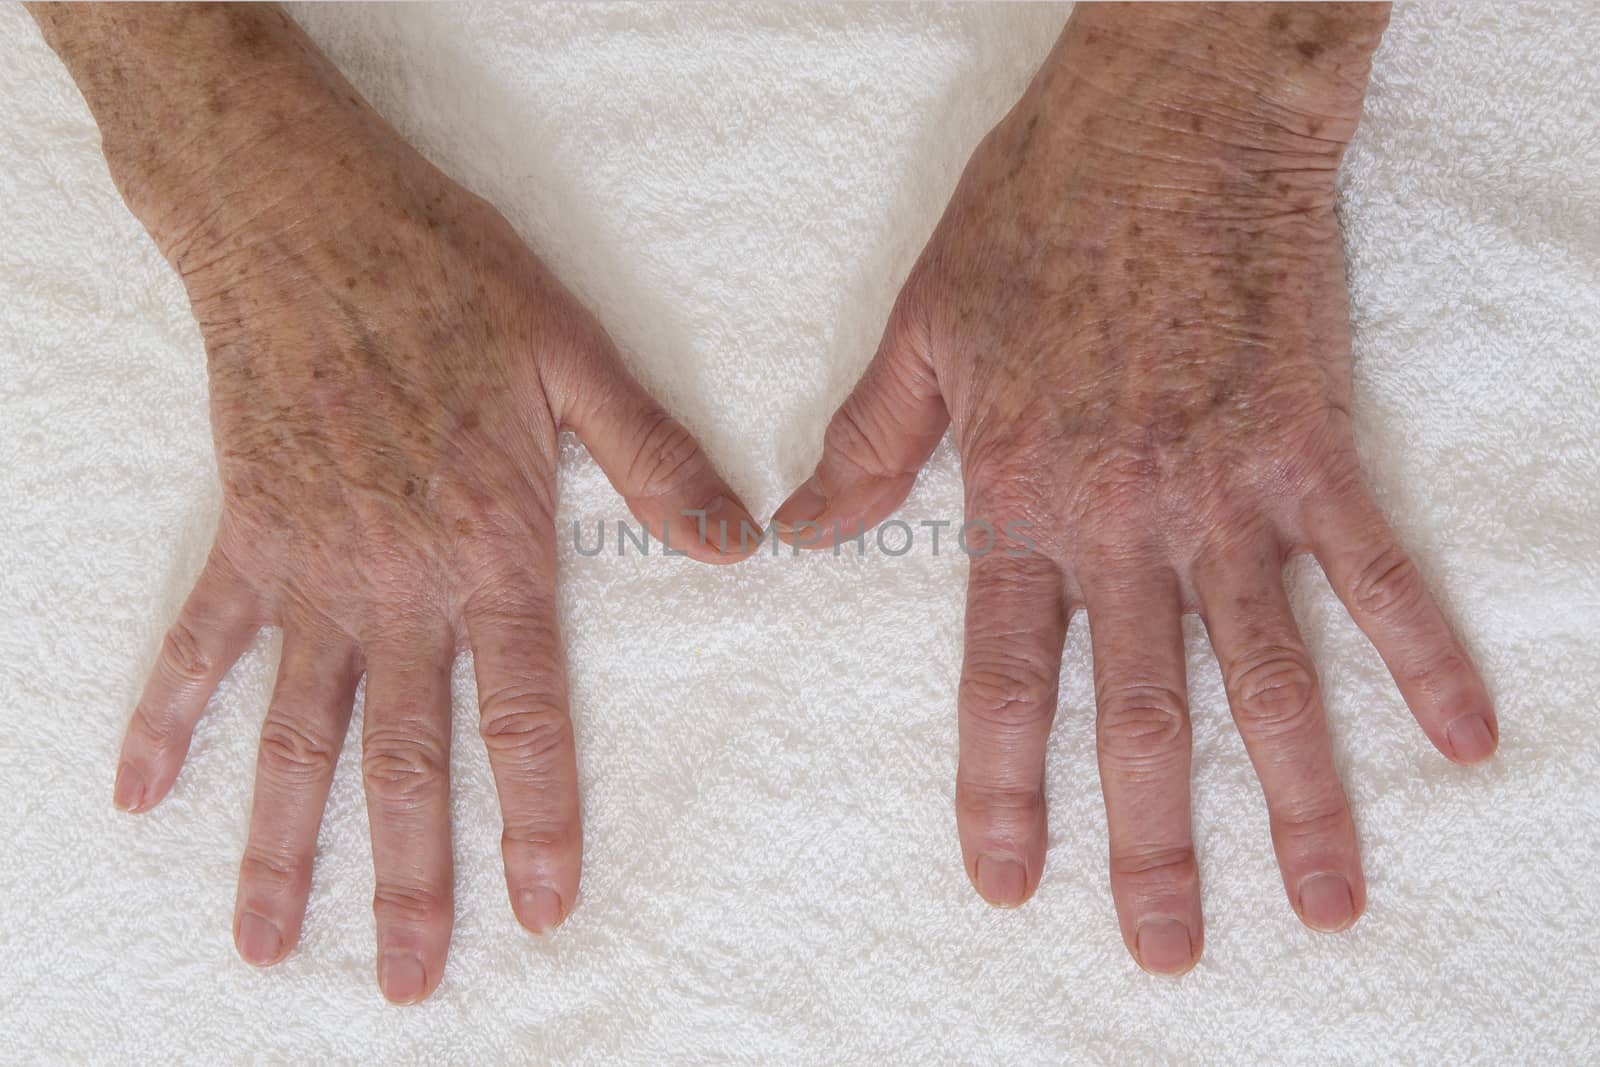 old stain on the skin- Skin disease on hands